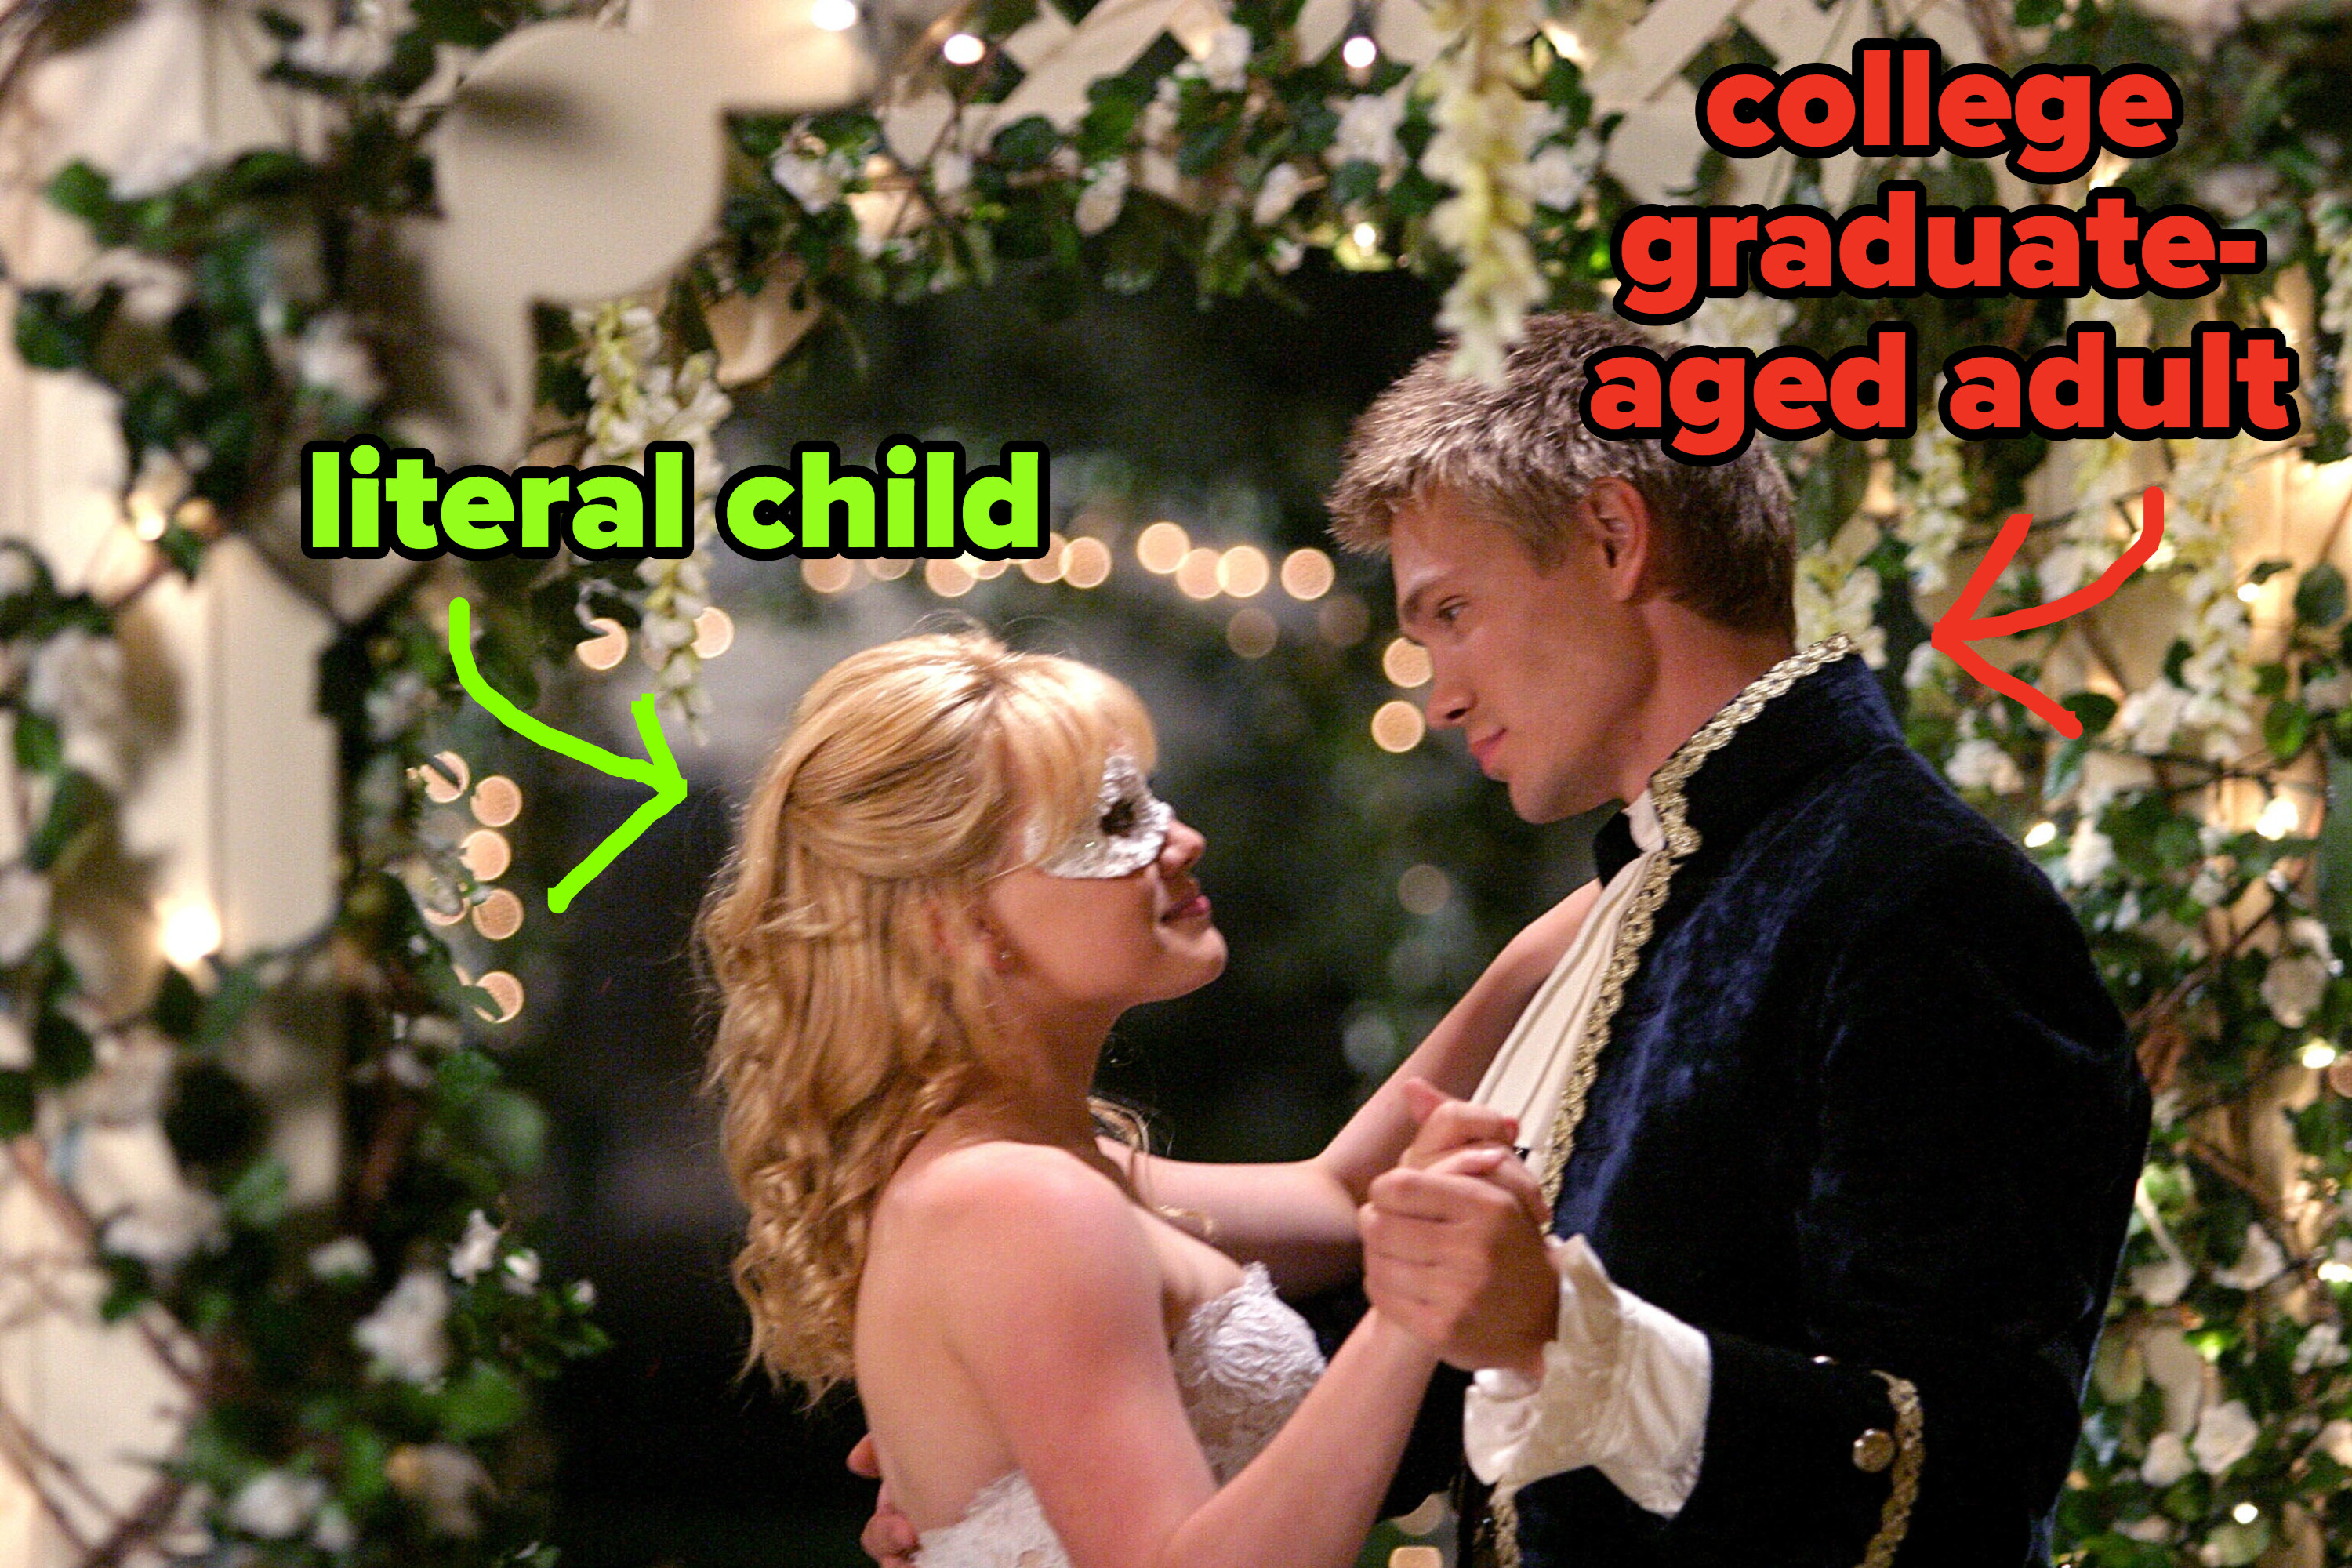 Hilary labeled &quot;literal child&quot; and chad labeled &quot;college graduate-age adult&quot; in the film